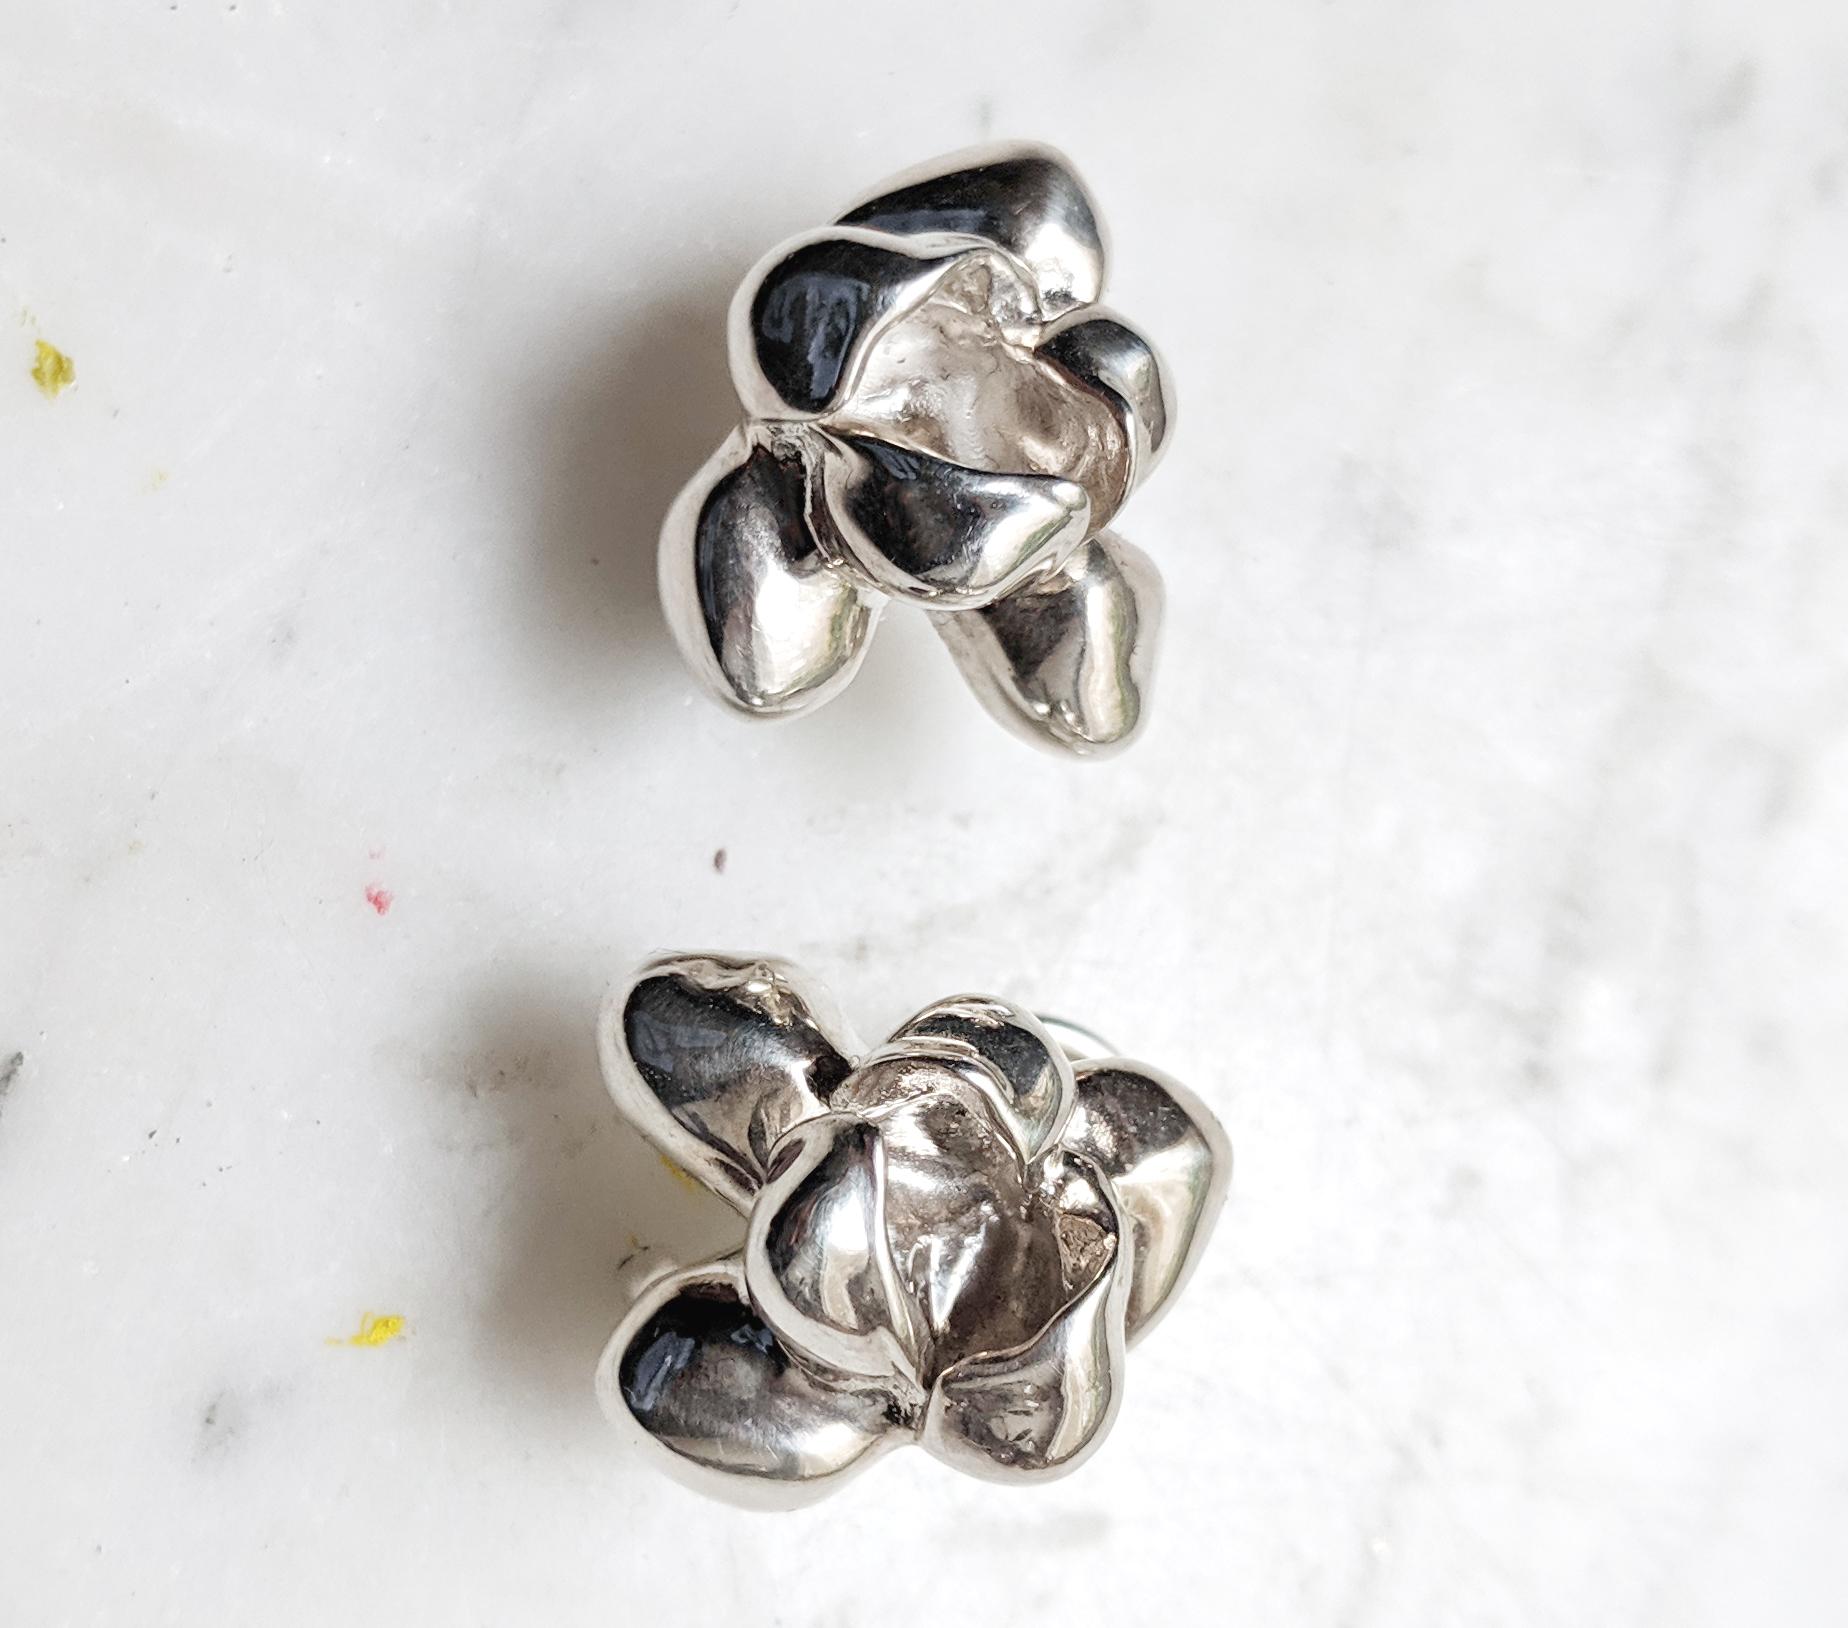 These Iris Blossom stud earrings, designed by artist Polya Medvedeva from Berlin, are crafted from sterling silver. The sculptural design of the earrings provides an extra shiny surface to the flowers, creating a subtle play of shadow and light.